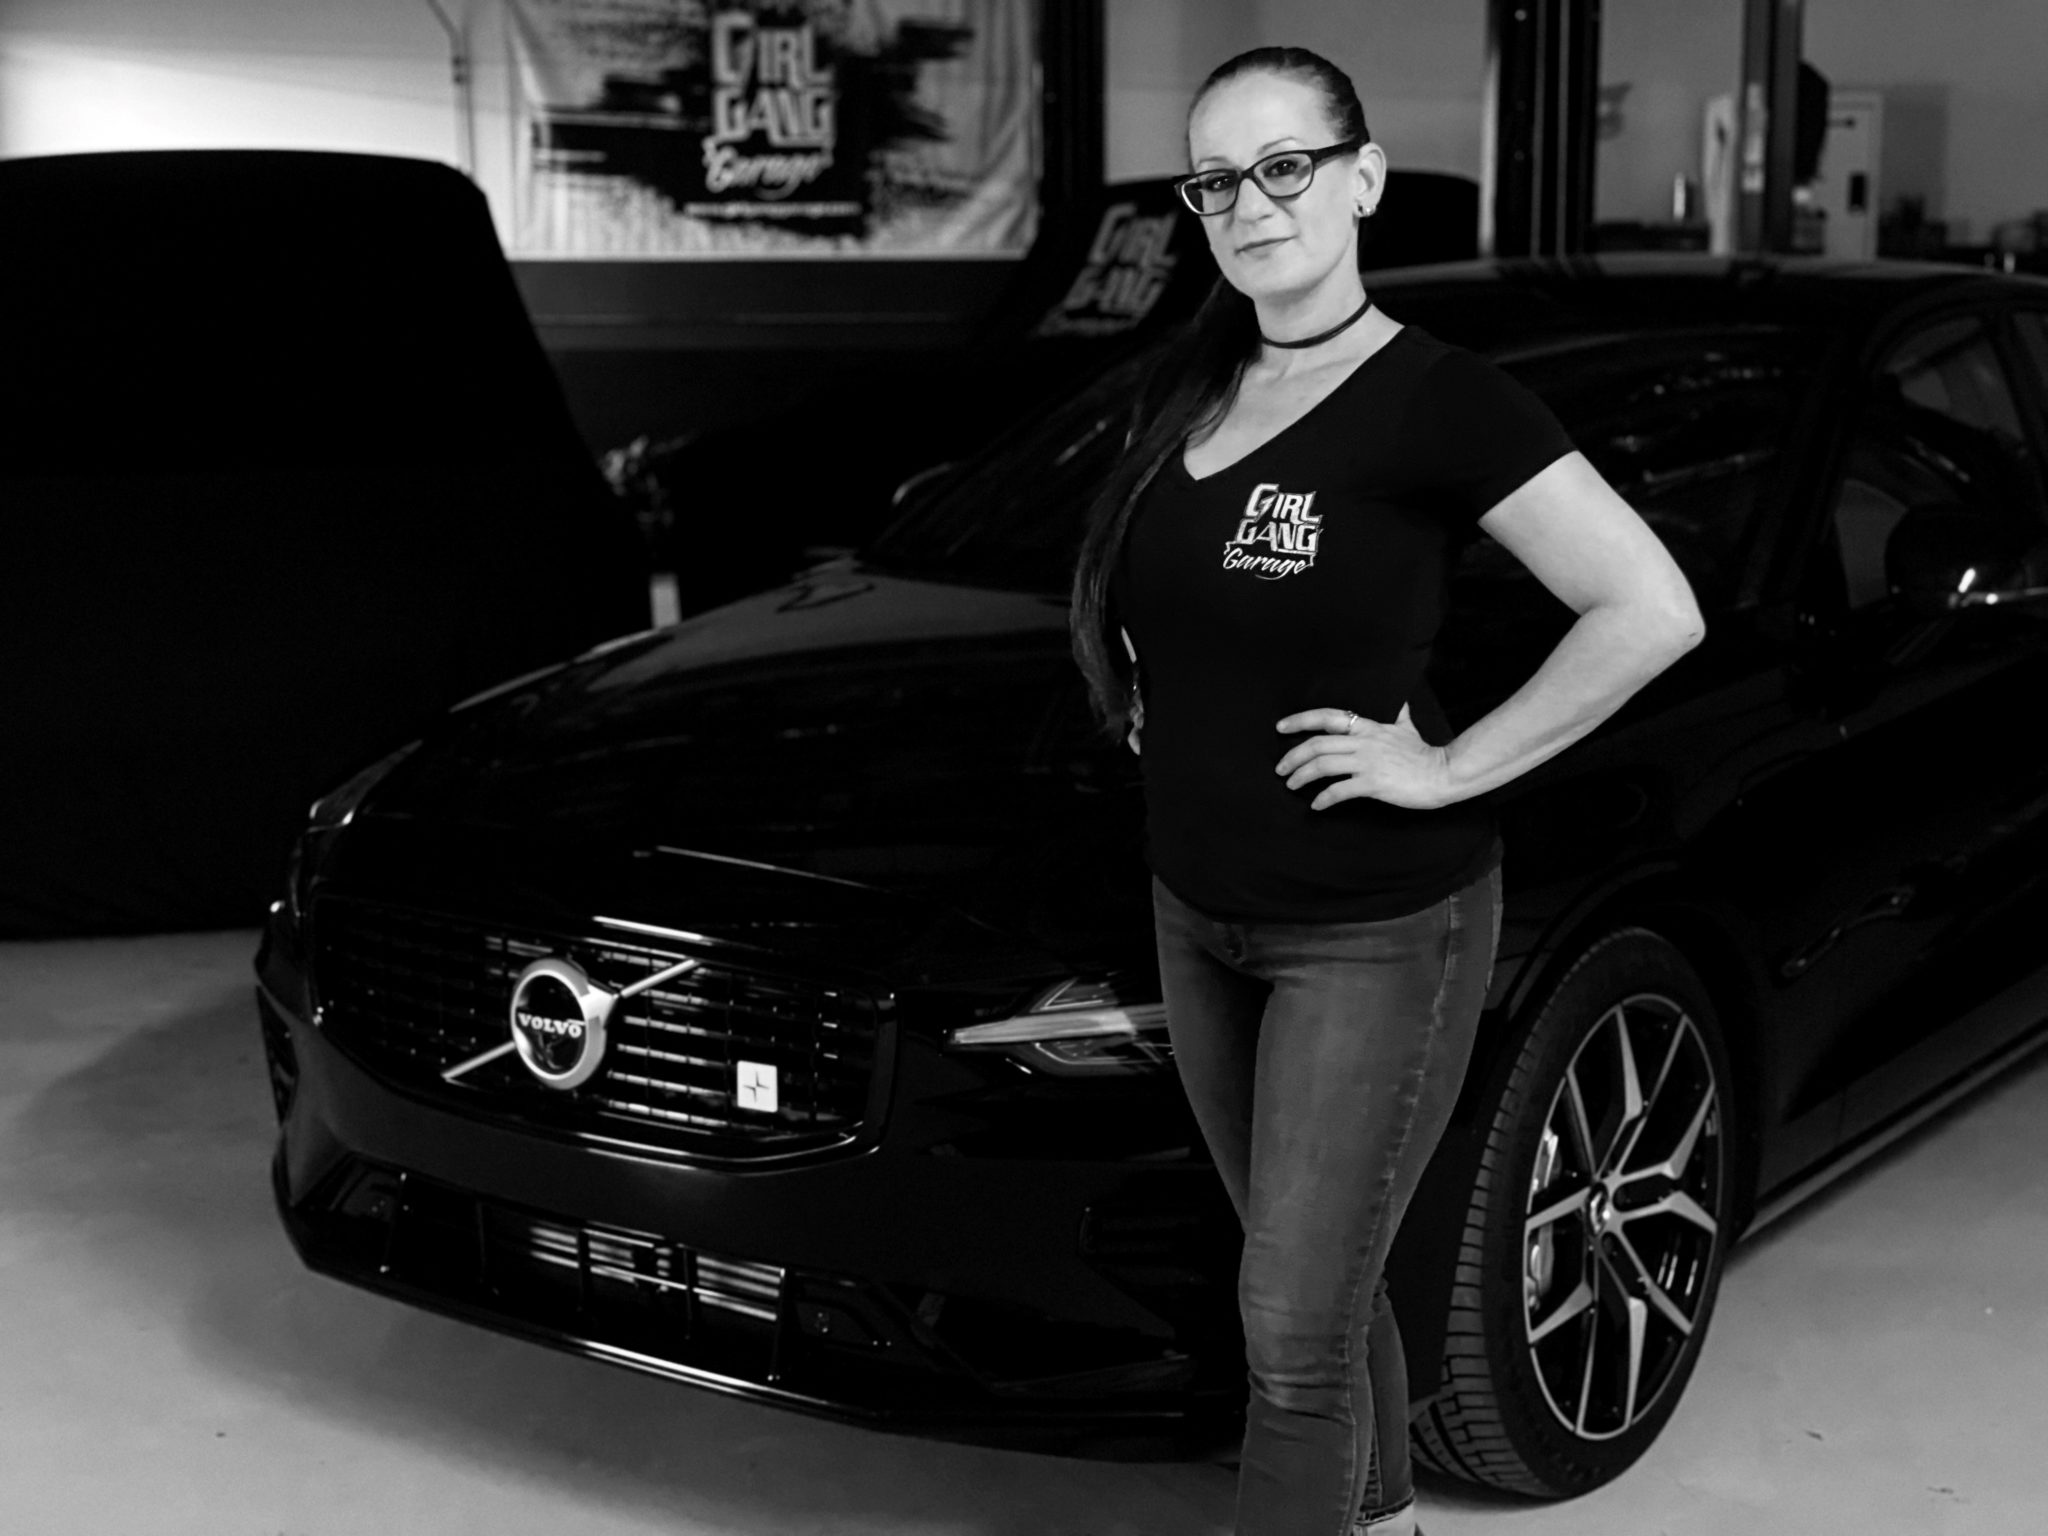 Bogi Lateiner Partners with Volvo to Build Hybrid RestoMod THE SHOP